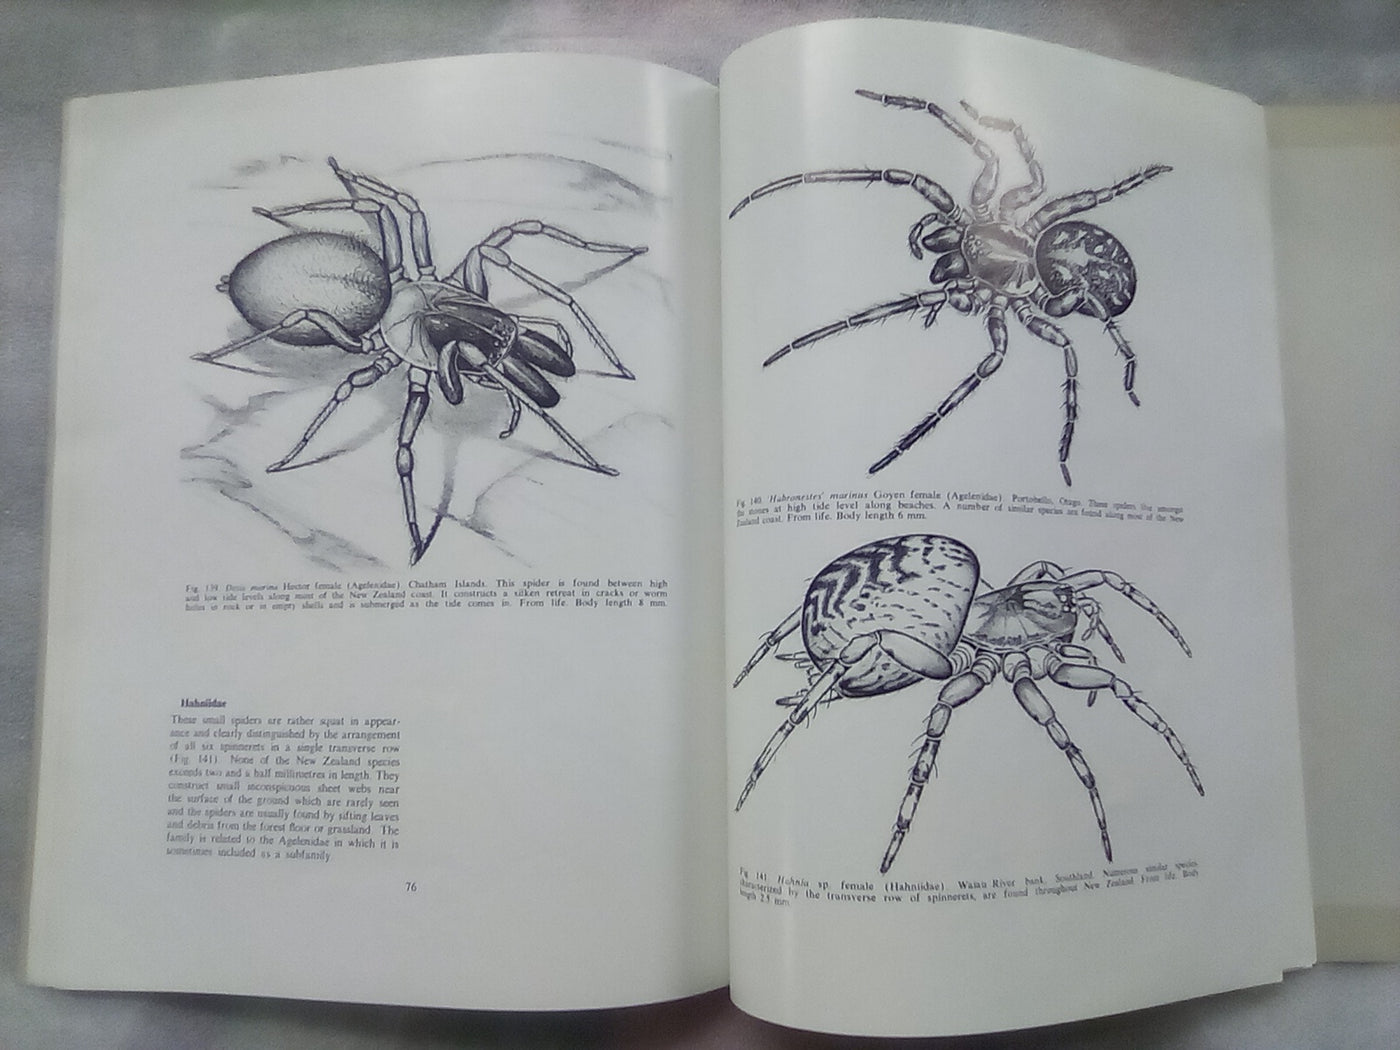 The Spiders of New Zealand - Part 1 (1967) by R.R. Forster